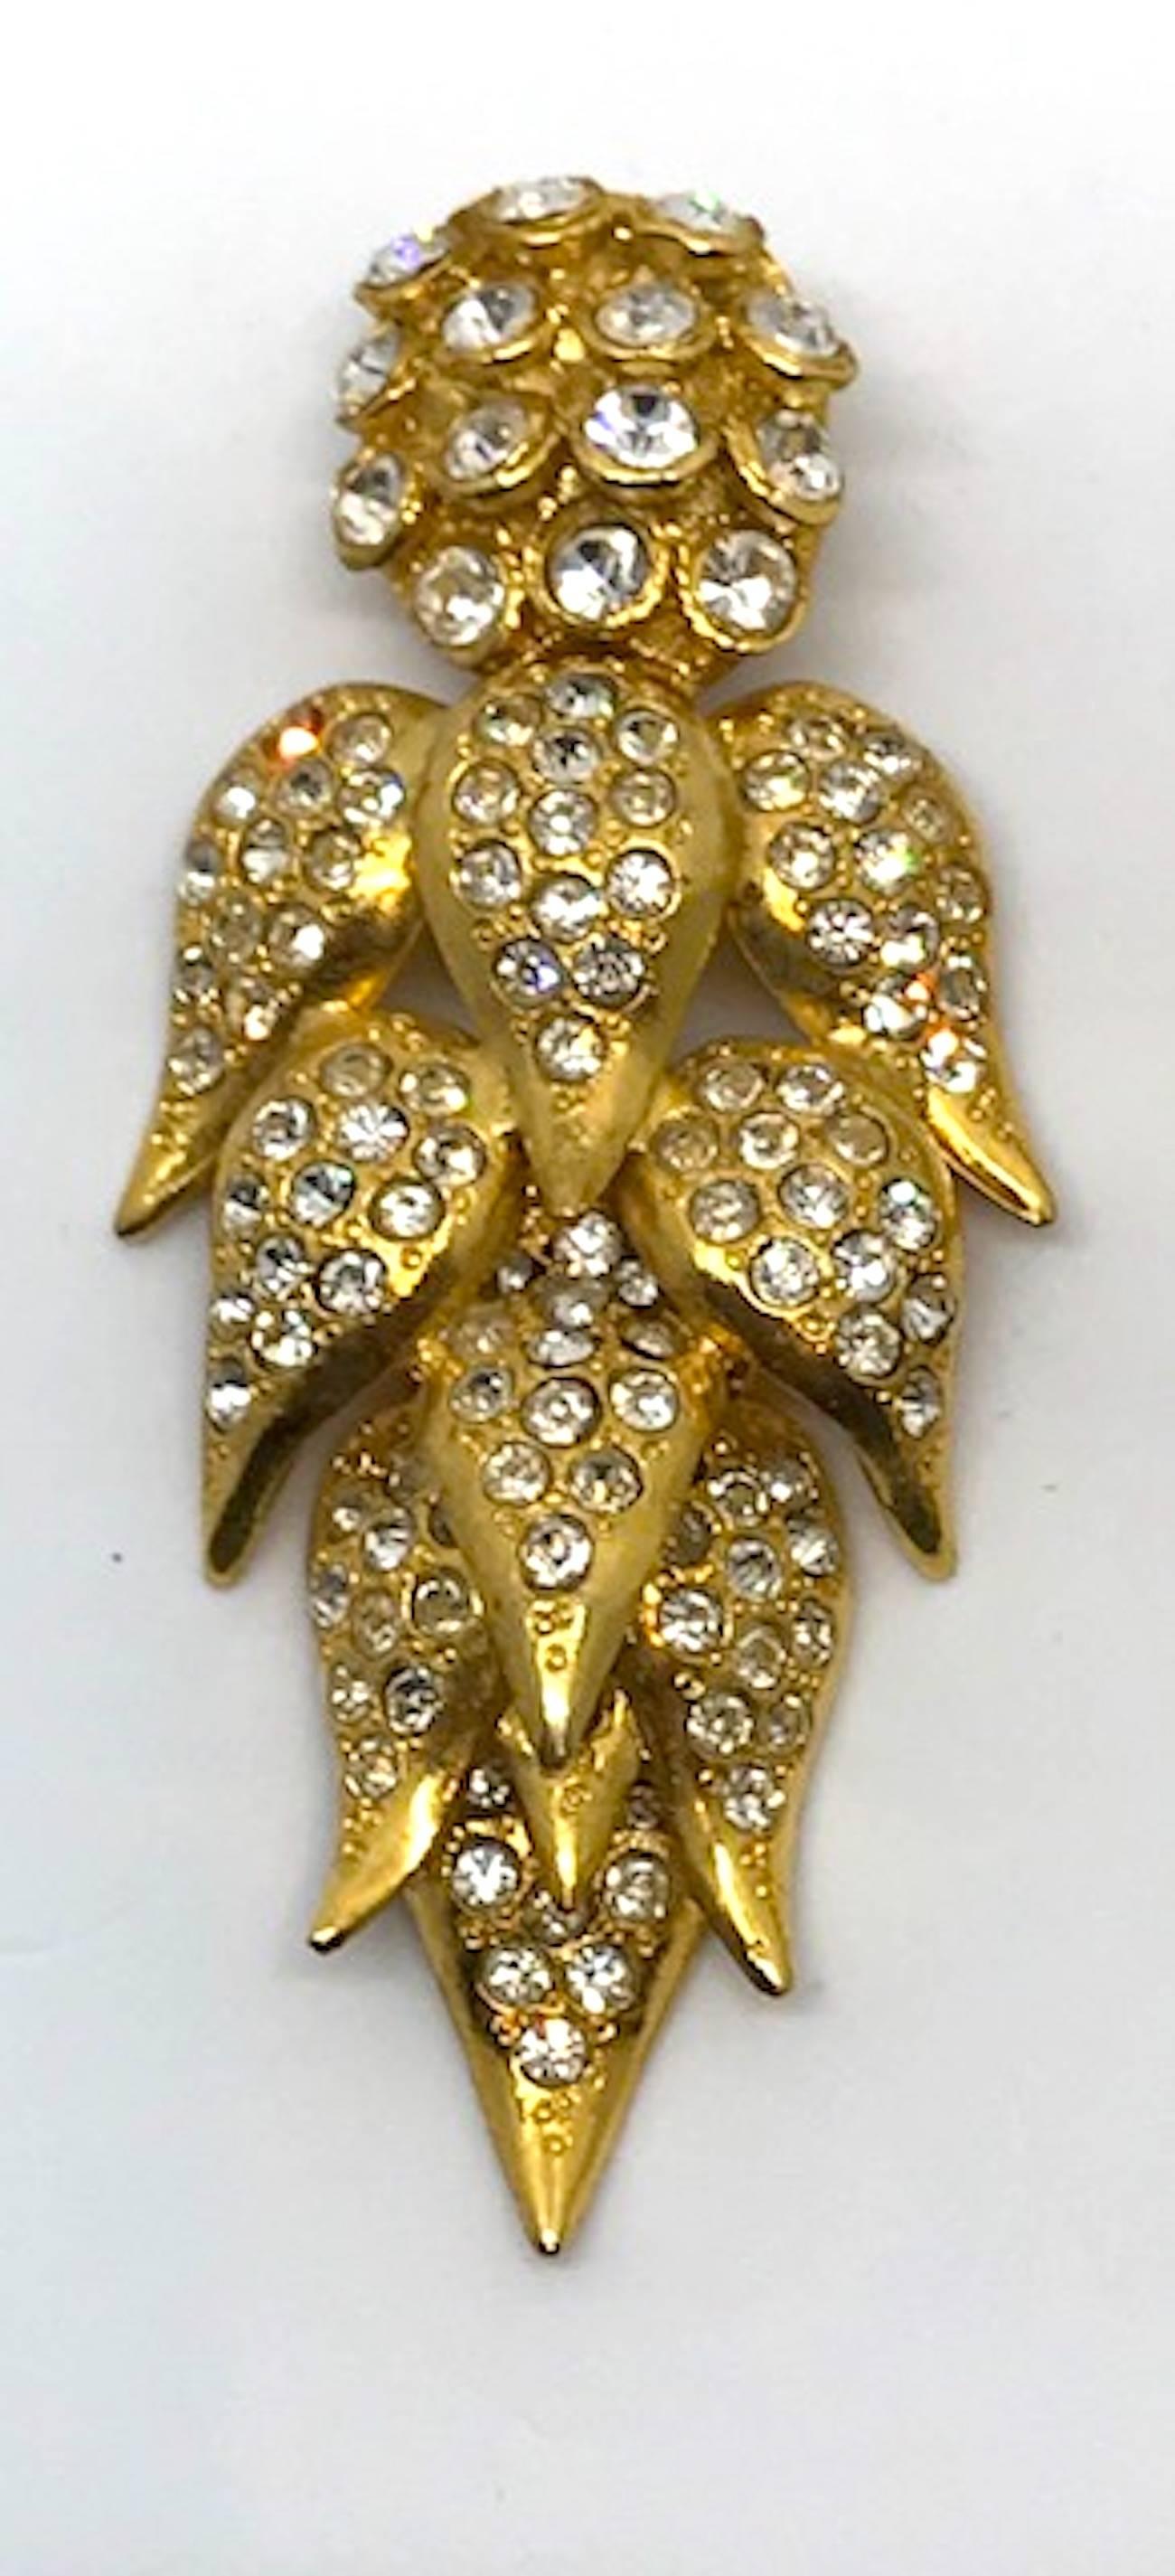 These show stopper 18K gilt and rhinestone leaf cluster earrings are from the personal collection of fine and costume jewelry of Italian actress Elsa Martinelli. Many of her pieces are by the fifty year old Italian jewelry company De Liguoro and